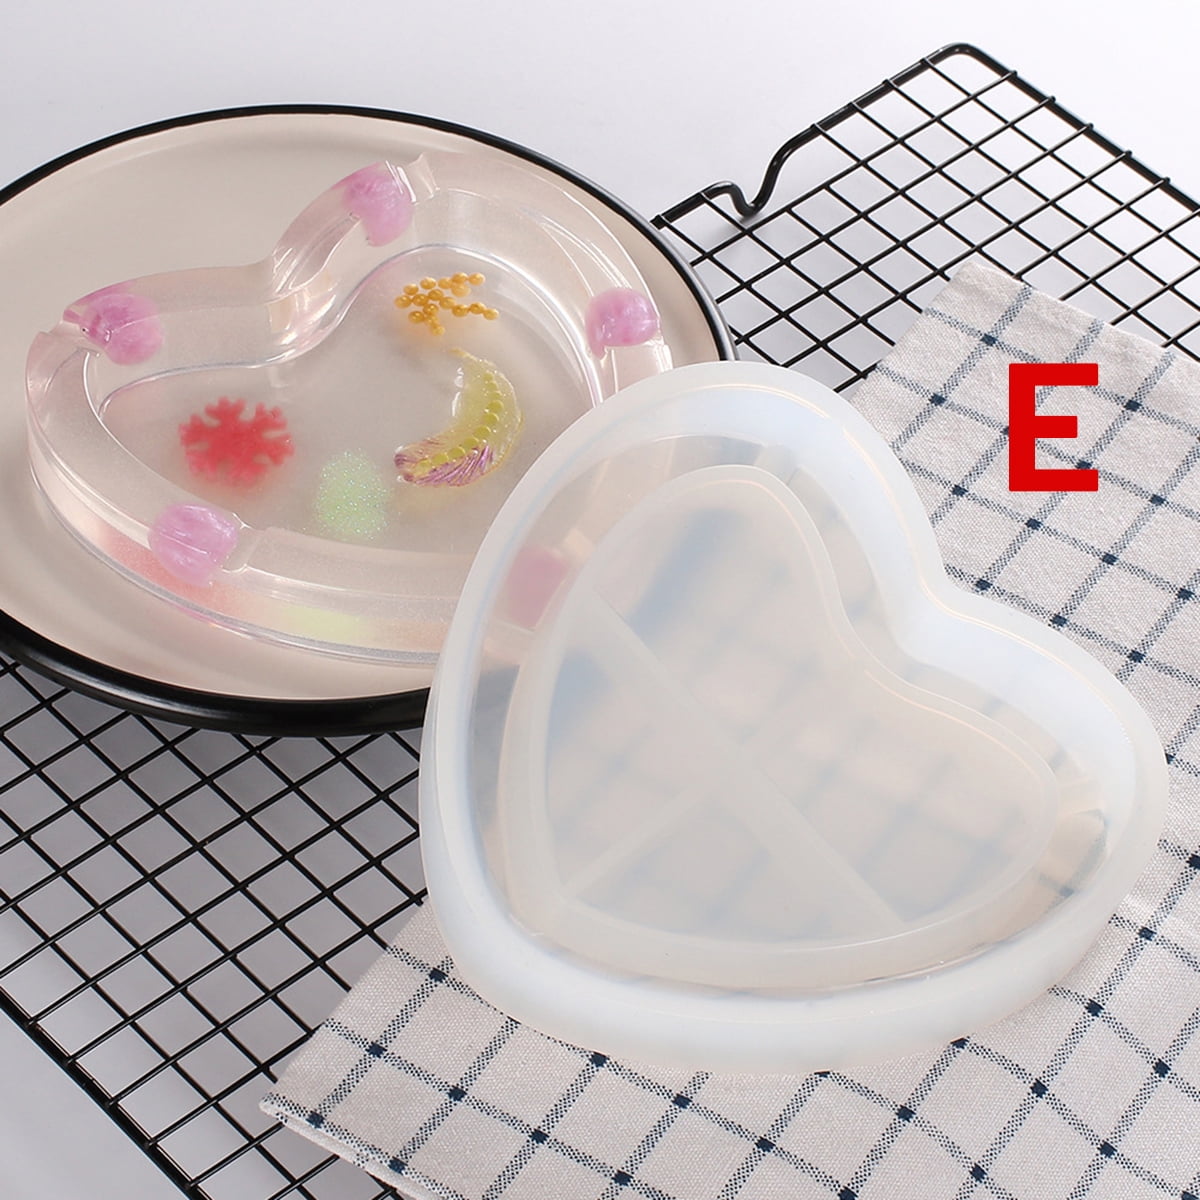 Silicone Ashtray Mold Resin Jewelery Making Mould Casting Epoxy DIY Craft Tool 